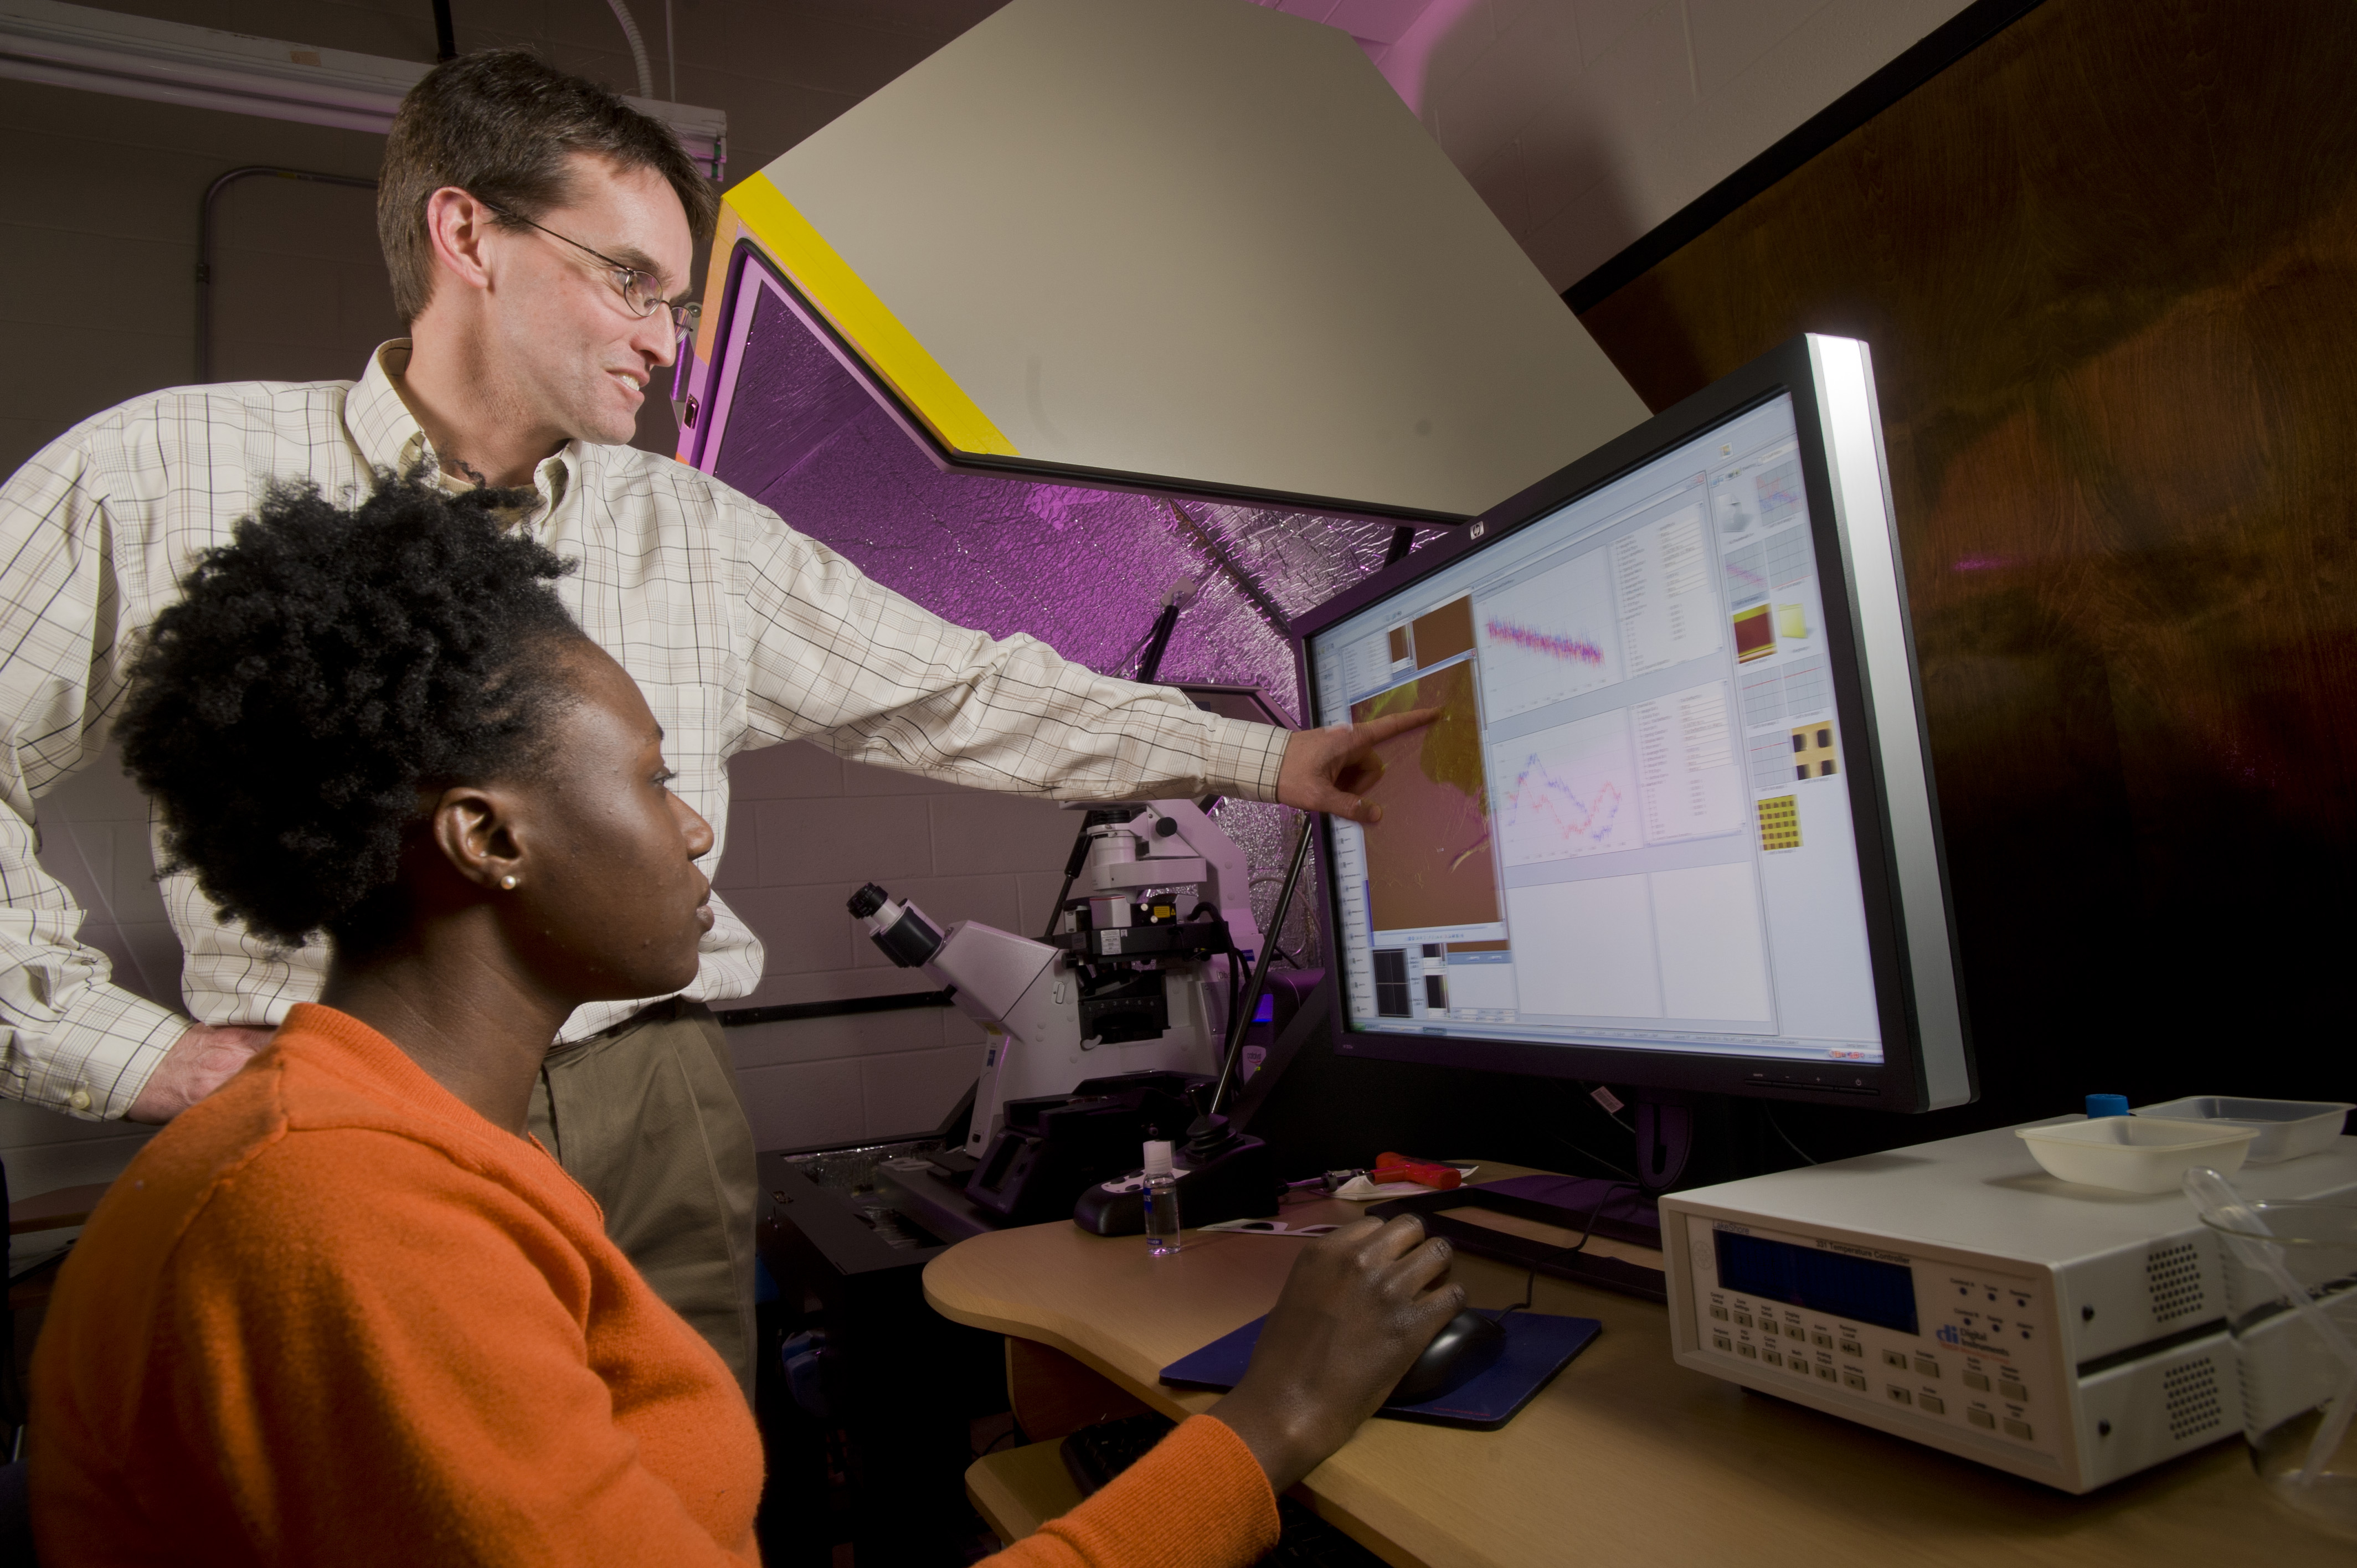 Discover the many great research opportunities VCU School of Medicine has to offer.